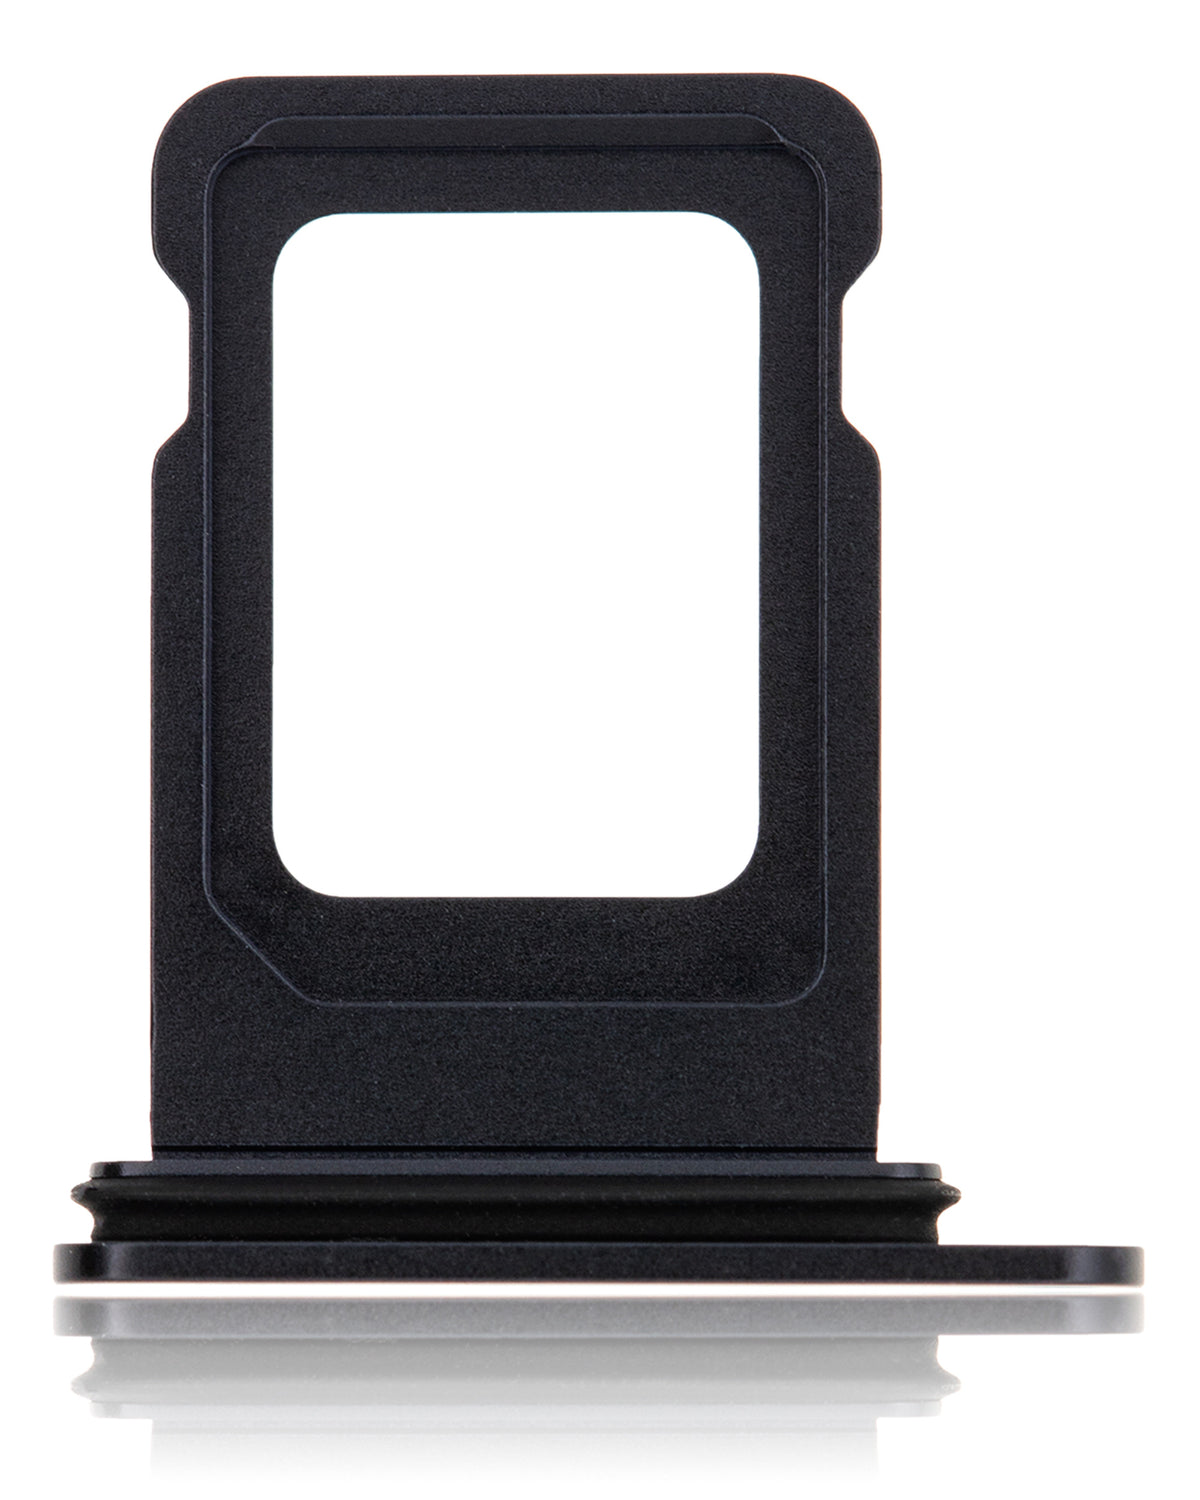 BLACK DUAL SIM CARD TRAY COMPATIBLE WITH IPHONE 12